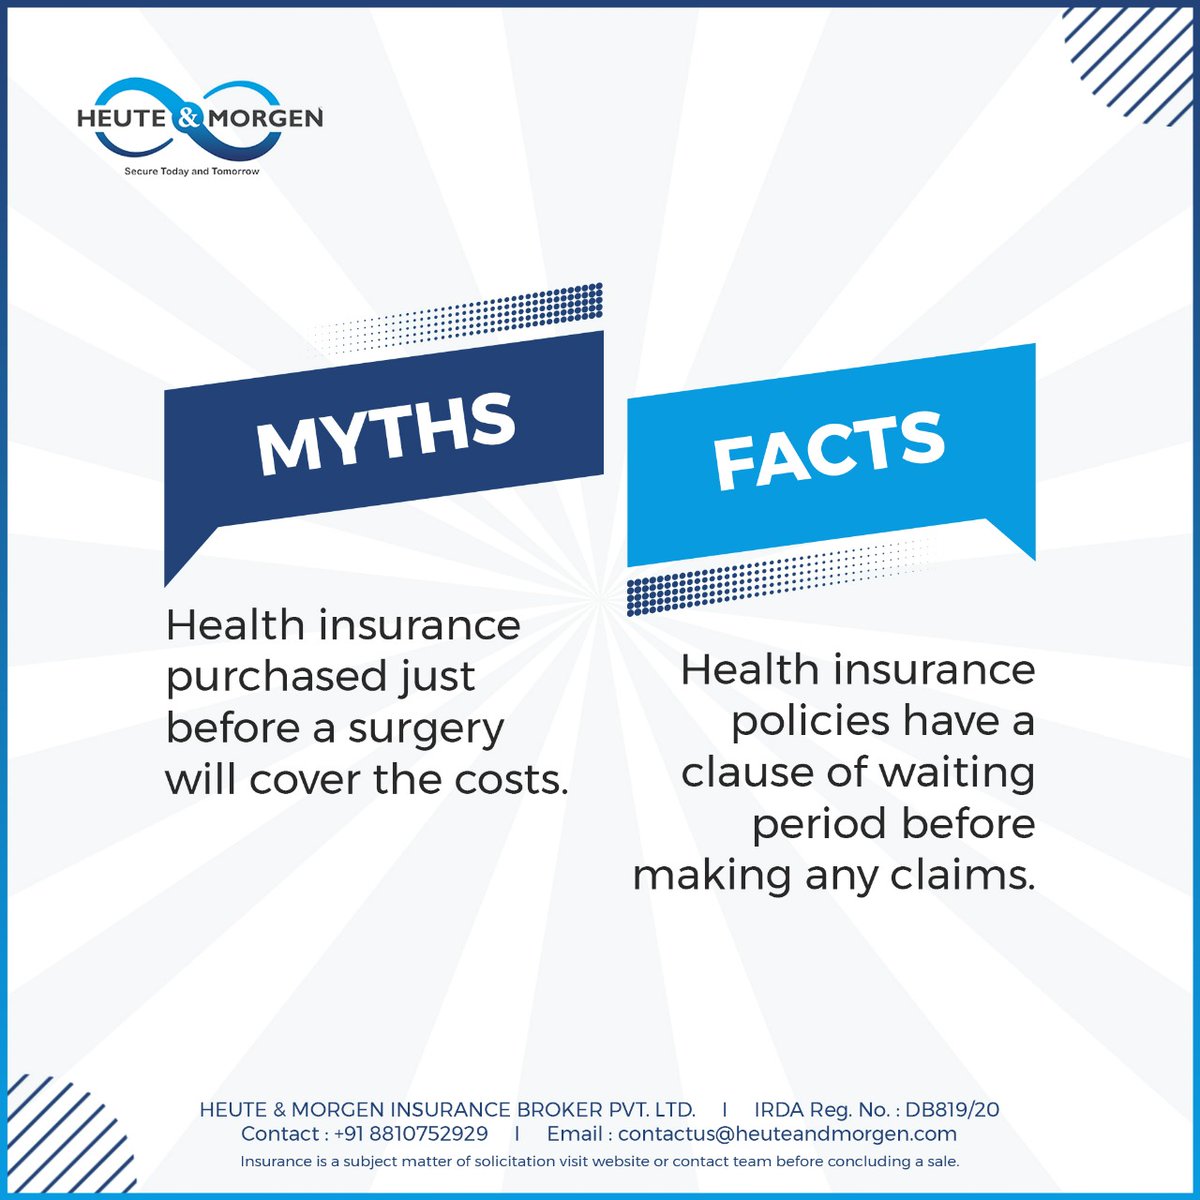 #InsuranceMyth: “Health insurance purchased just before a surgery will cover the costs.”

#HealthInsurance policies often have a clause for a waiting period before making any claims. Also, pre-existing diseases will be covered post completing the waiting period.